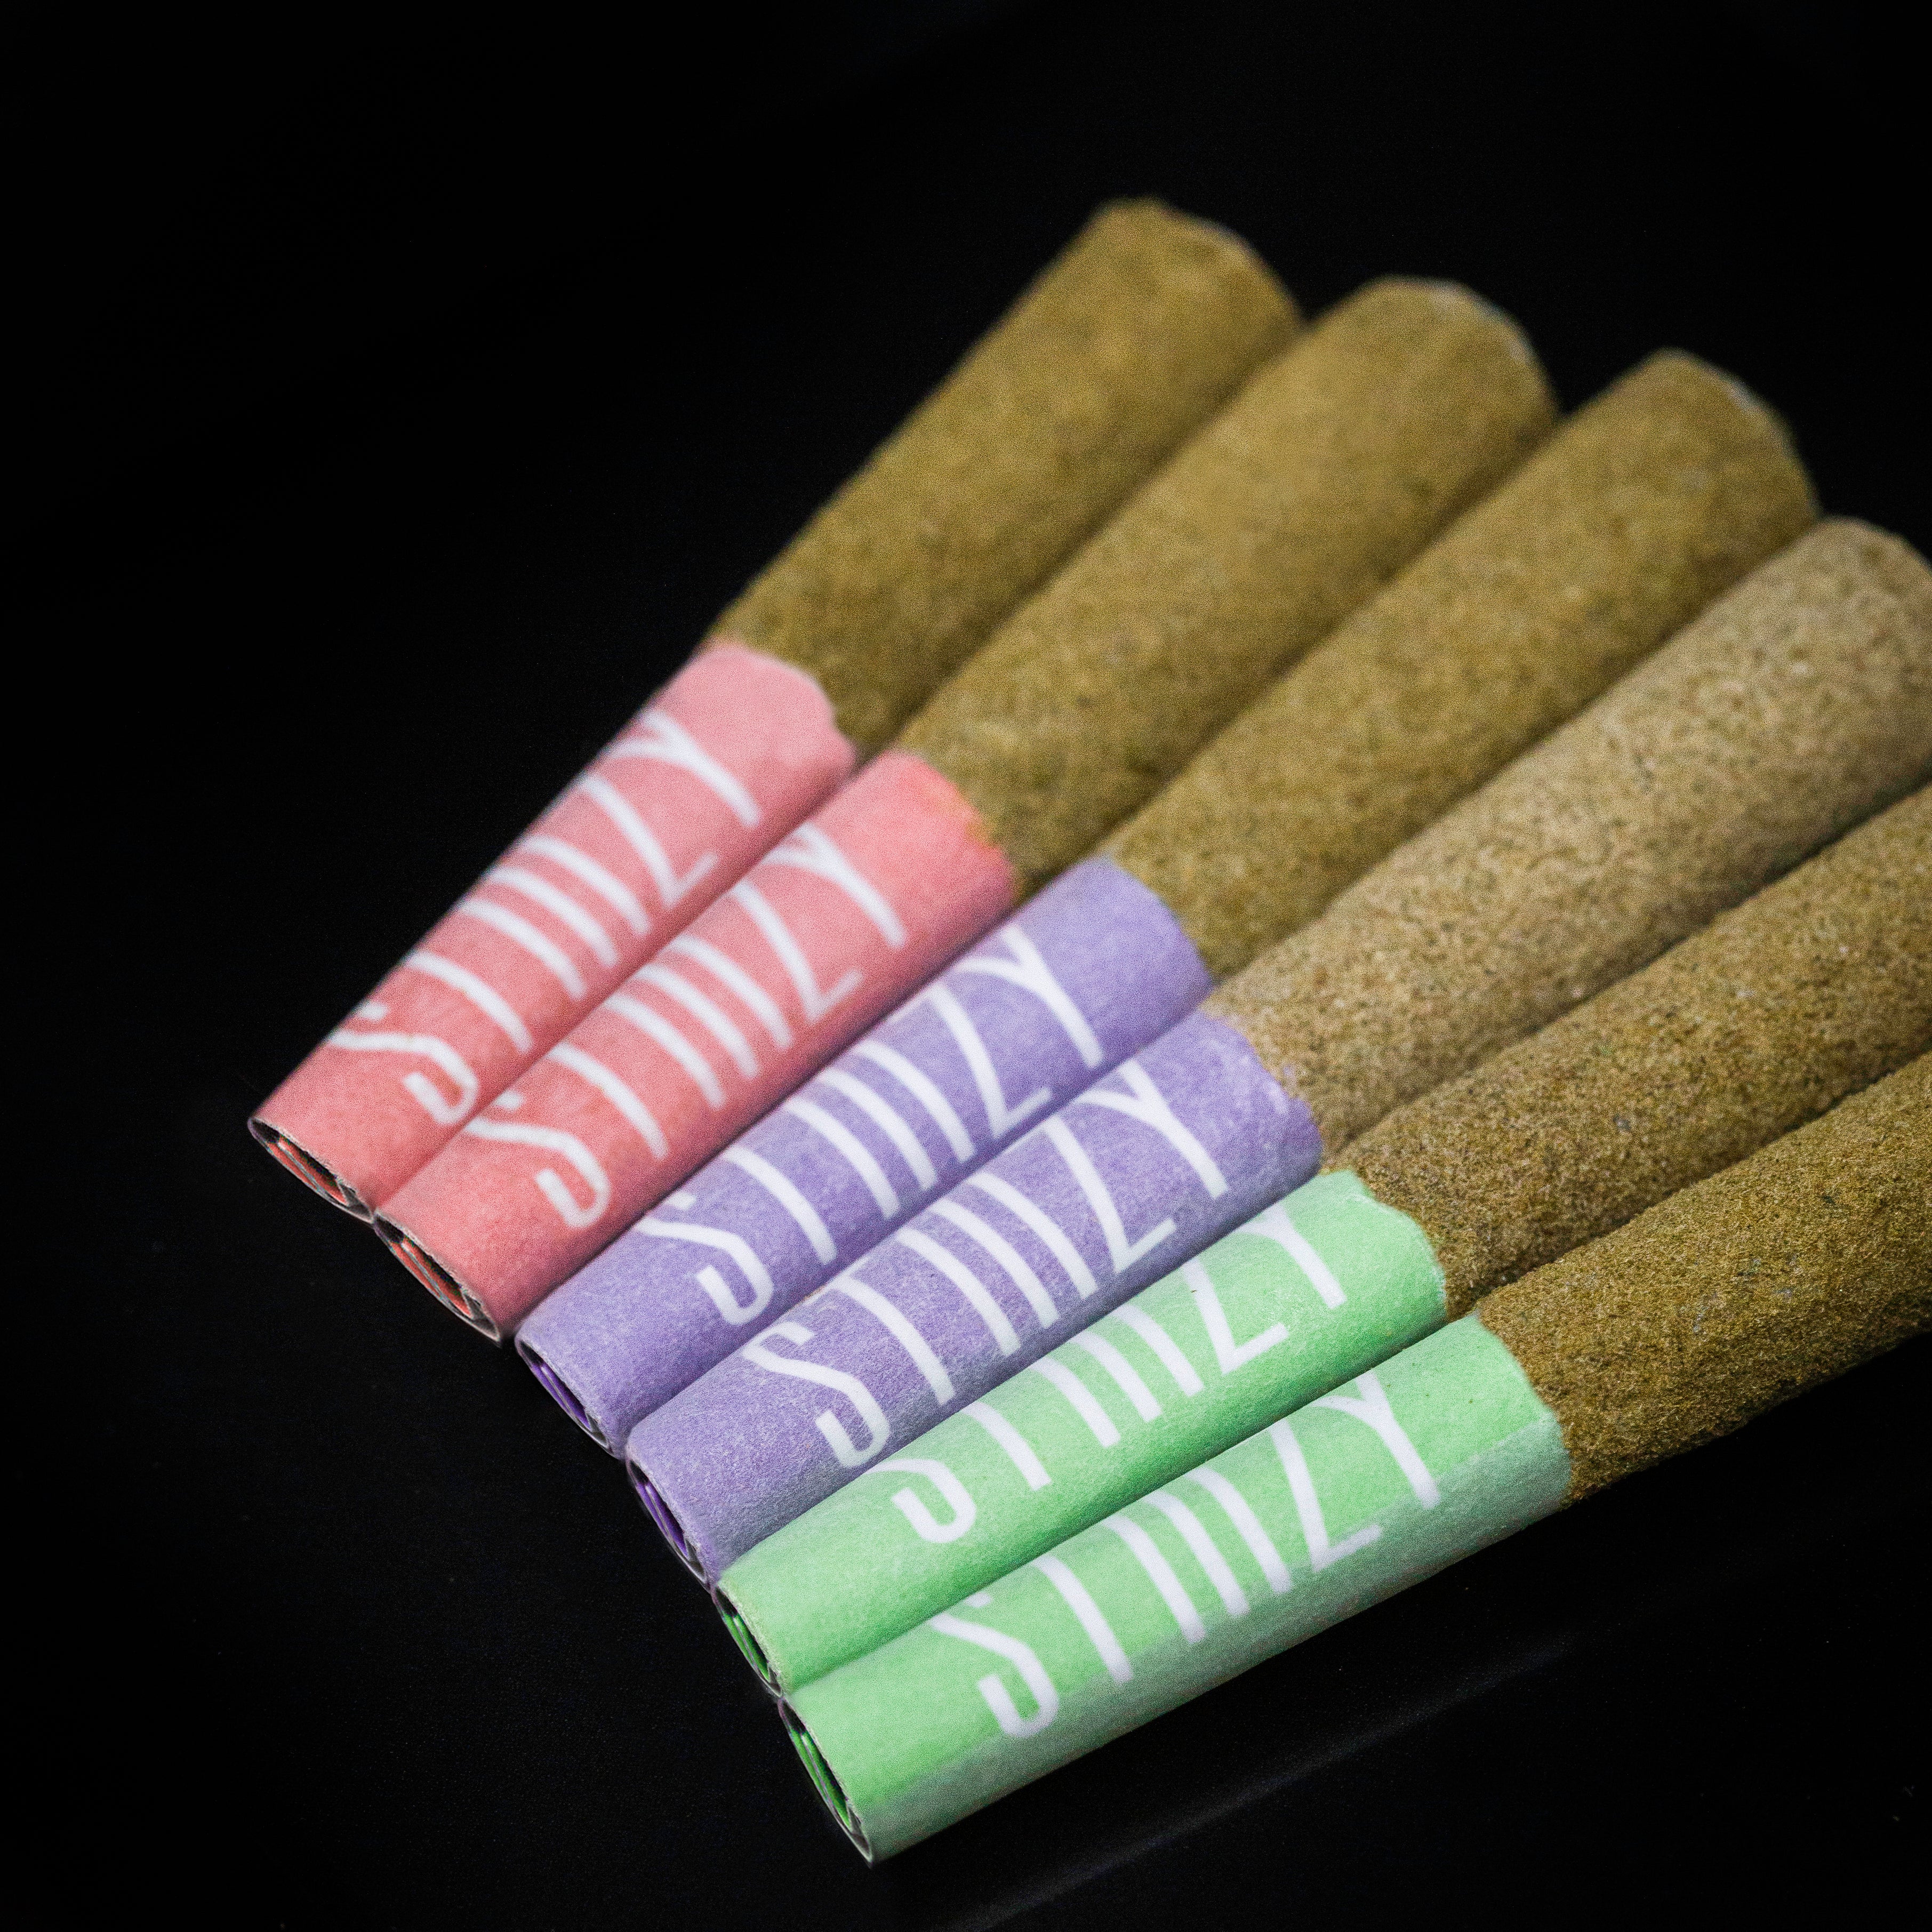 Stiiizy's infused pre-rolls can come coated with kief.